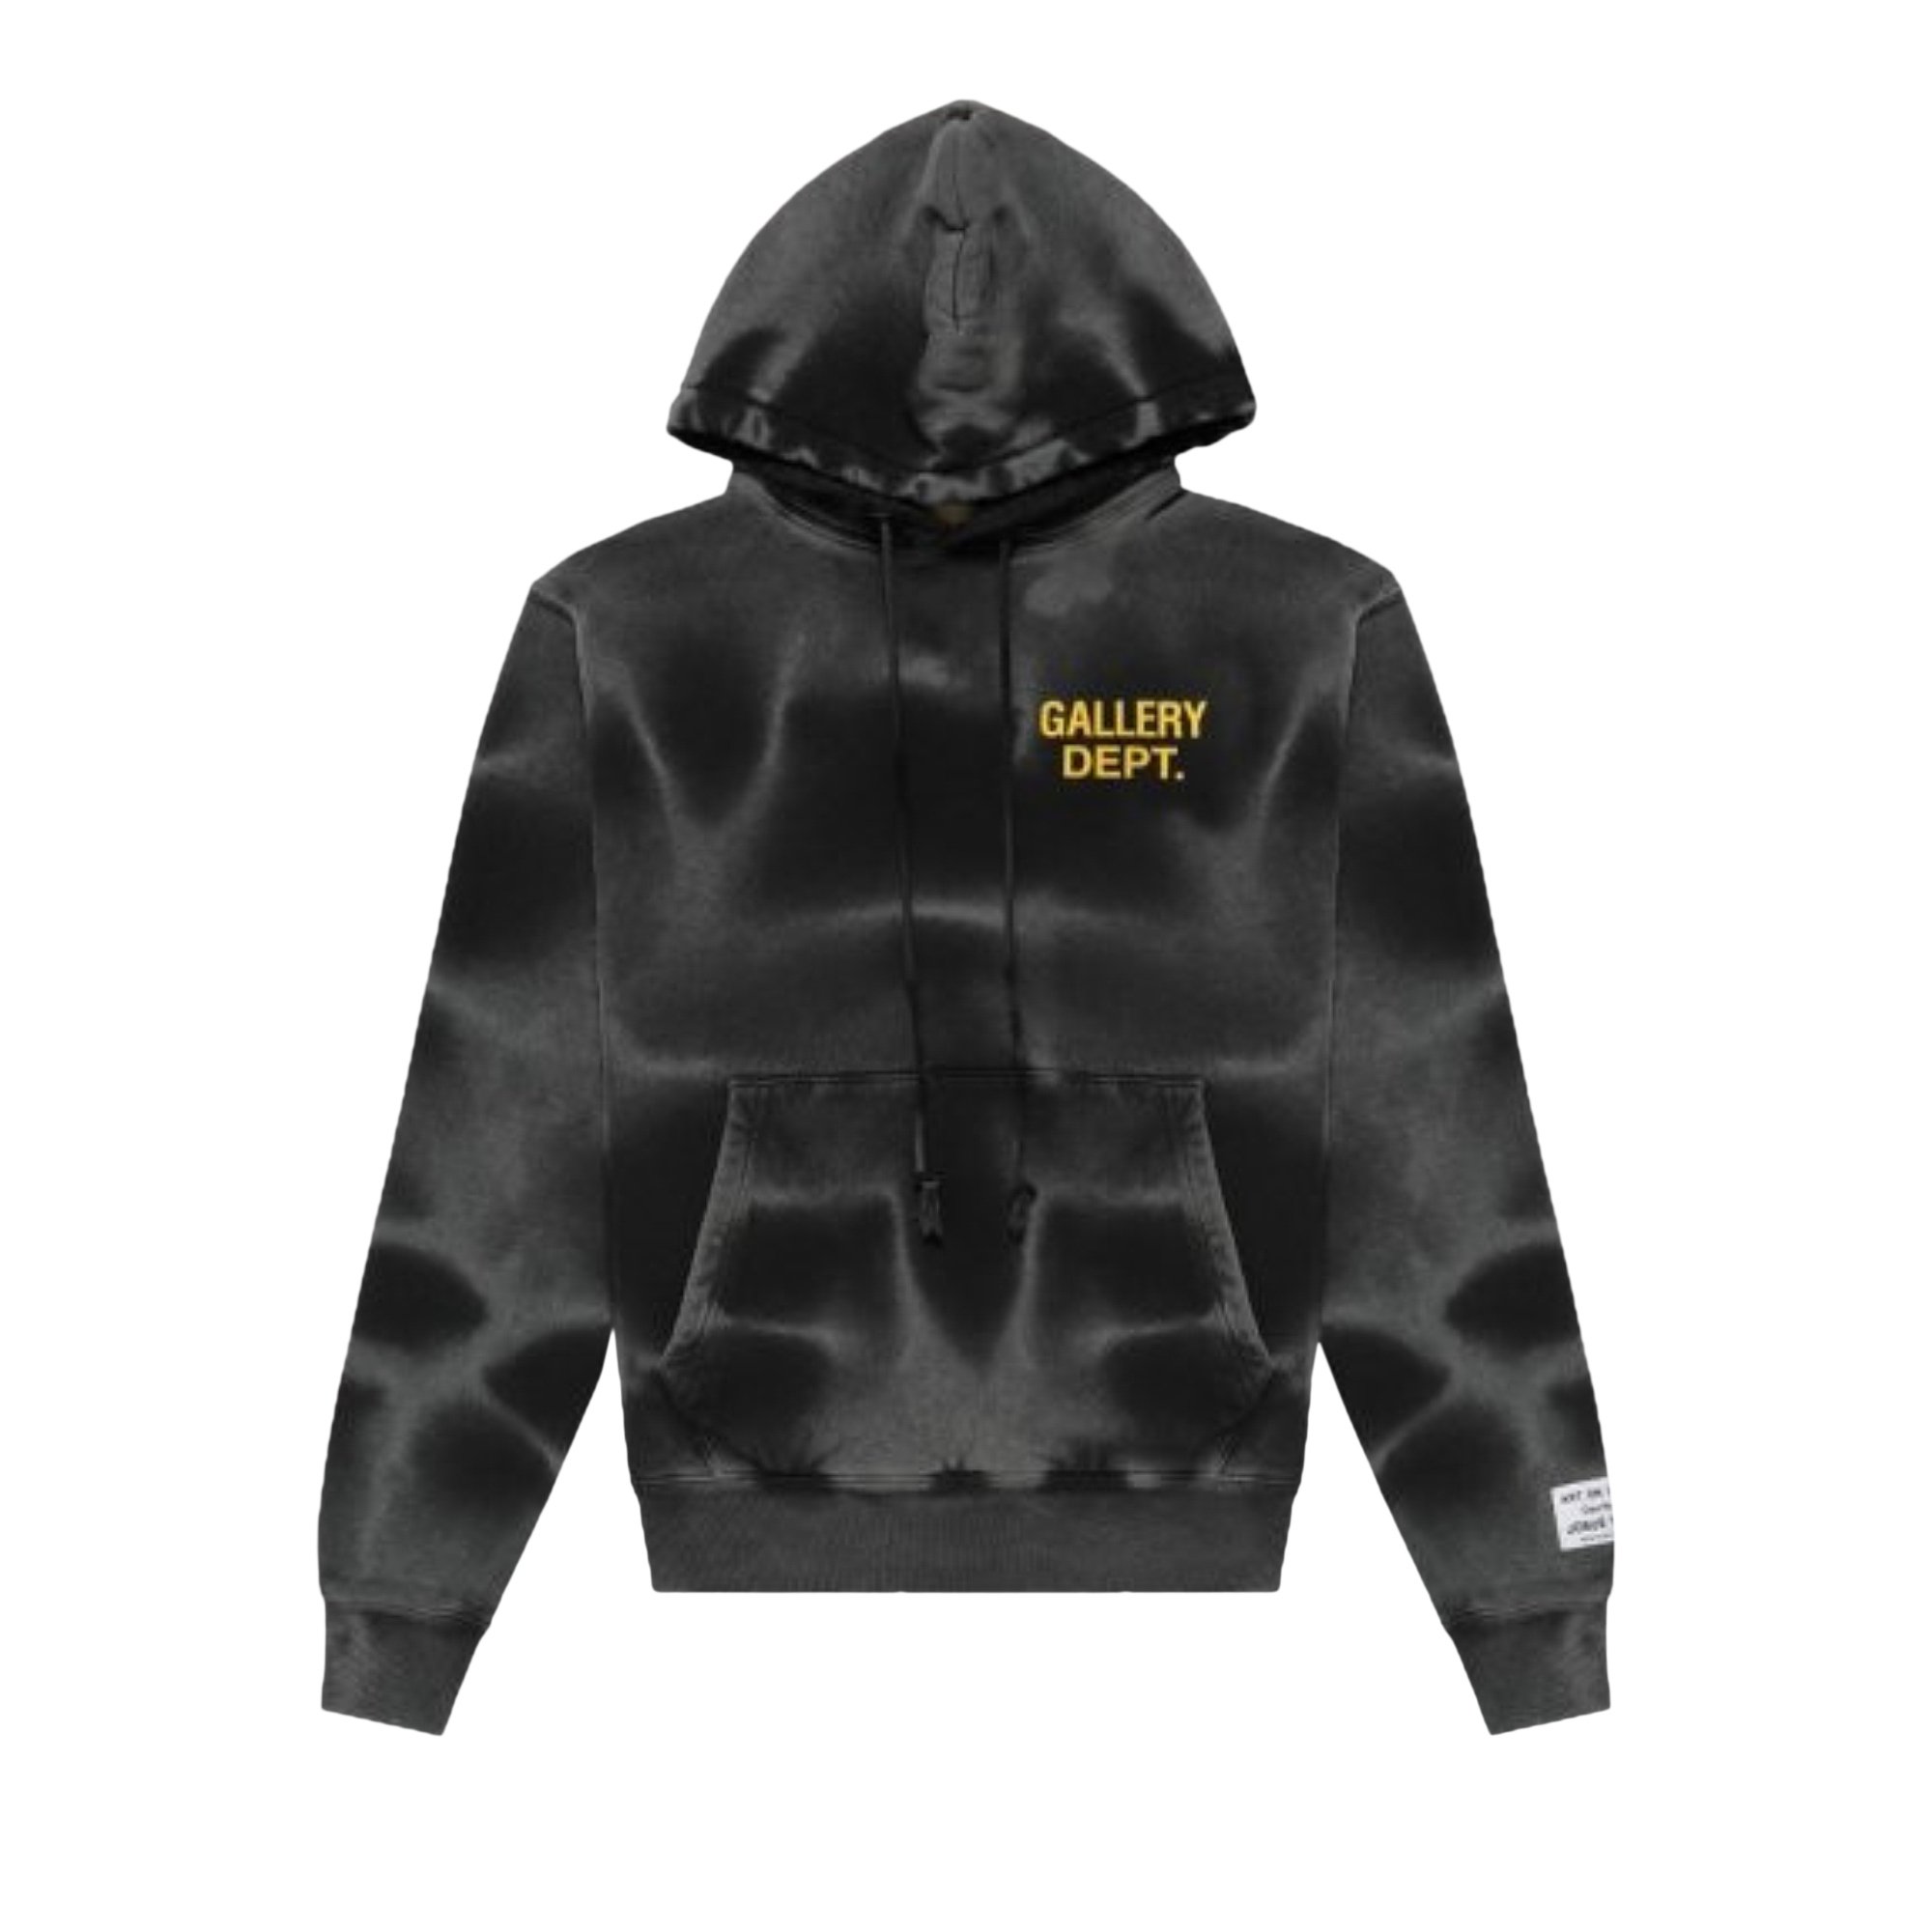 Buy Gallery Dept. GD Sunfaded Pullover Hoodie 'Sun Faded Black' - SFPH 2000  SUN | GOAT